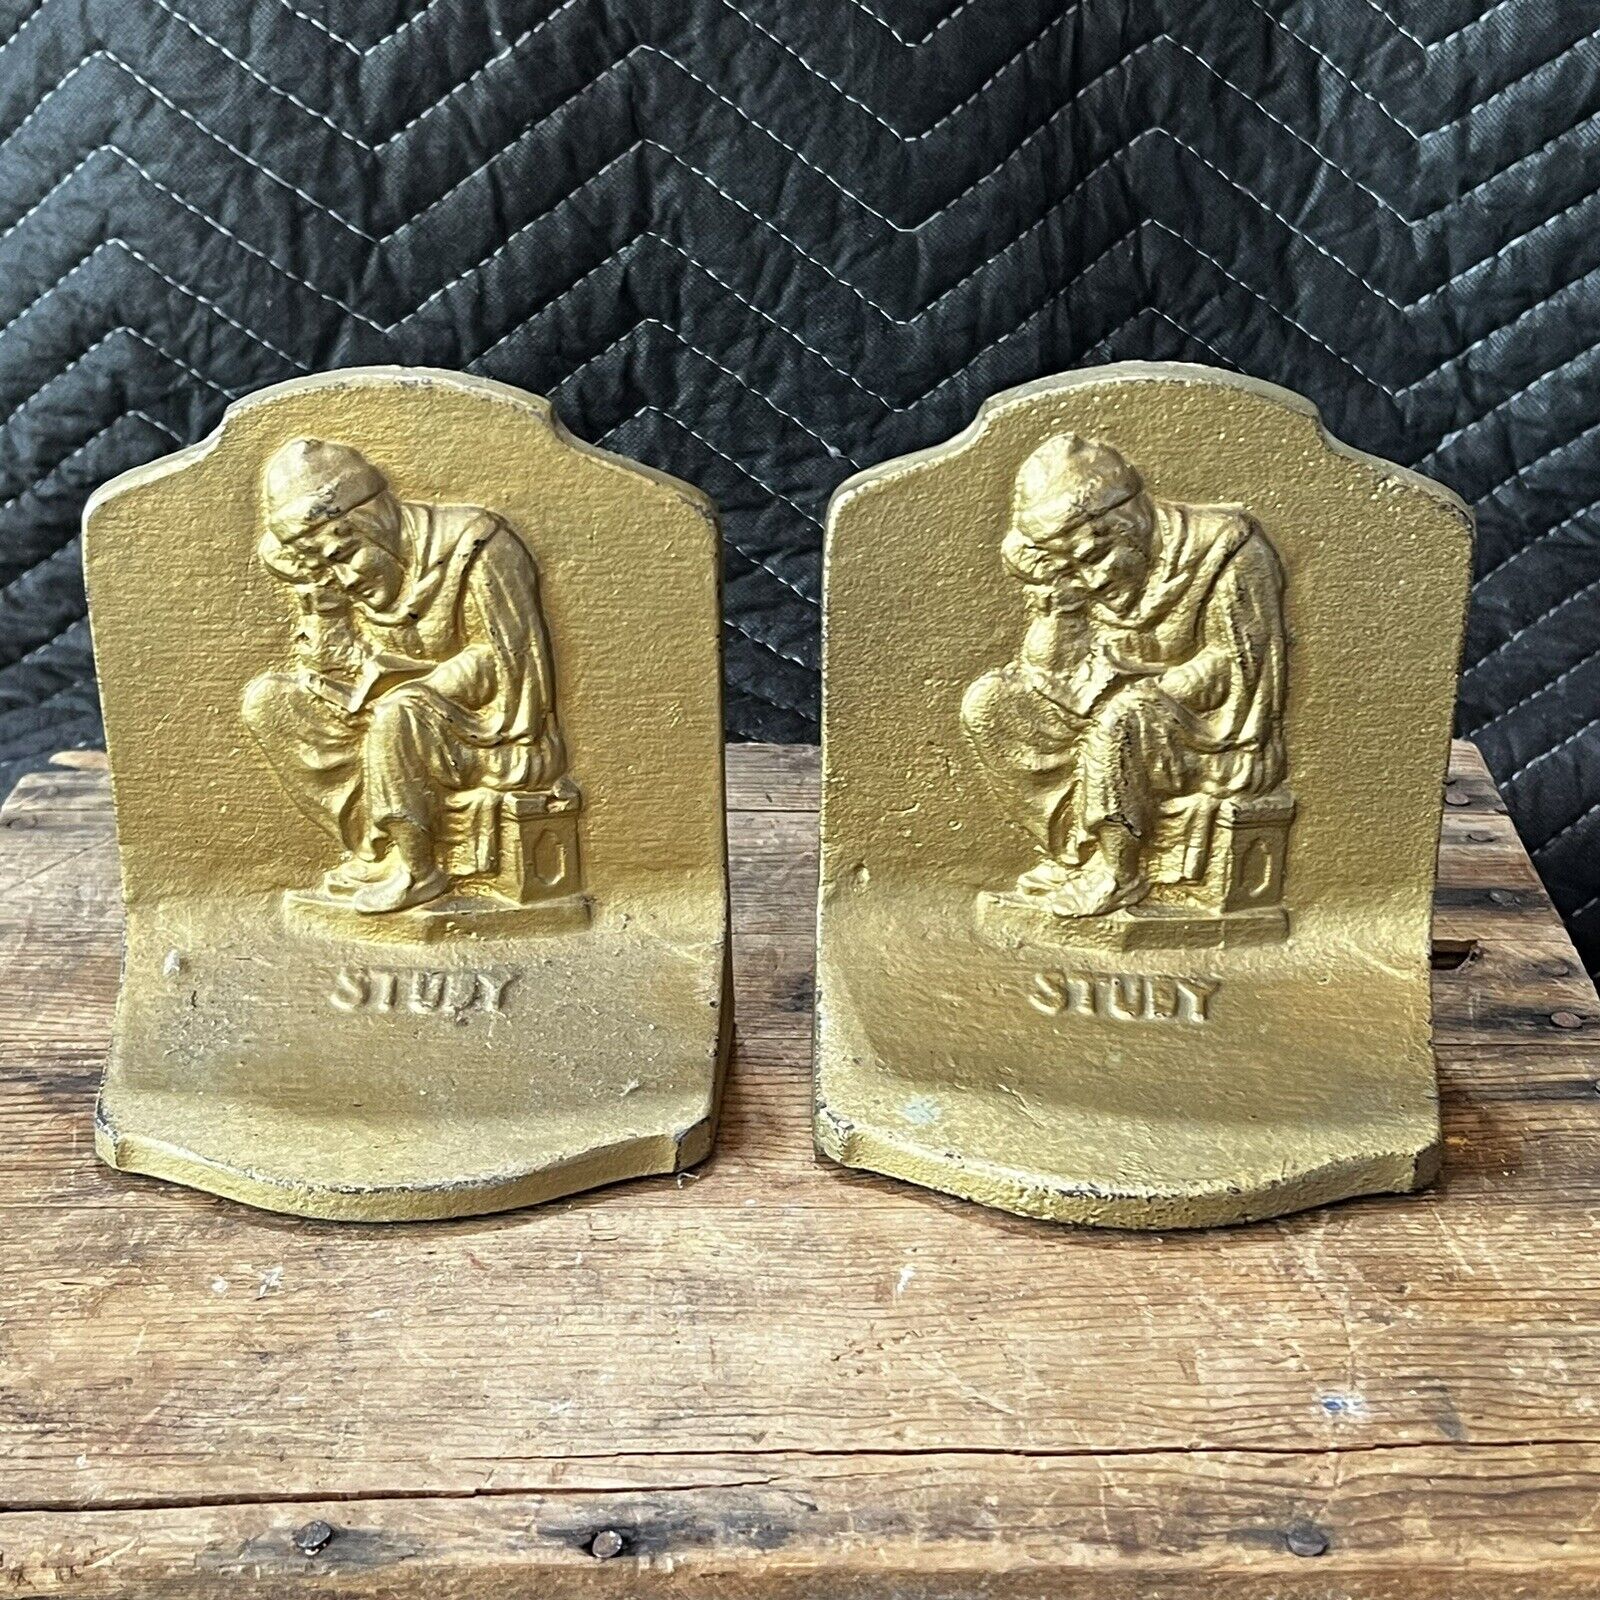 Pair of Vintage B&H Bradley & Hubbard Gold Painted Cast Iron “Study” Bookends